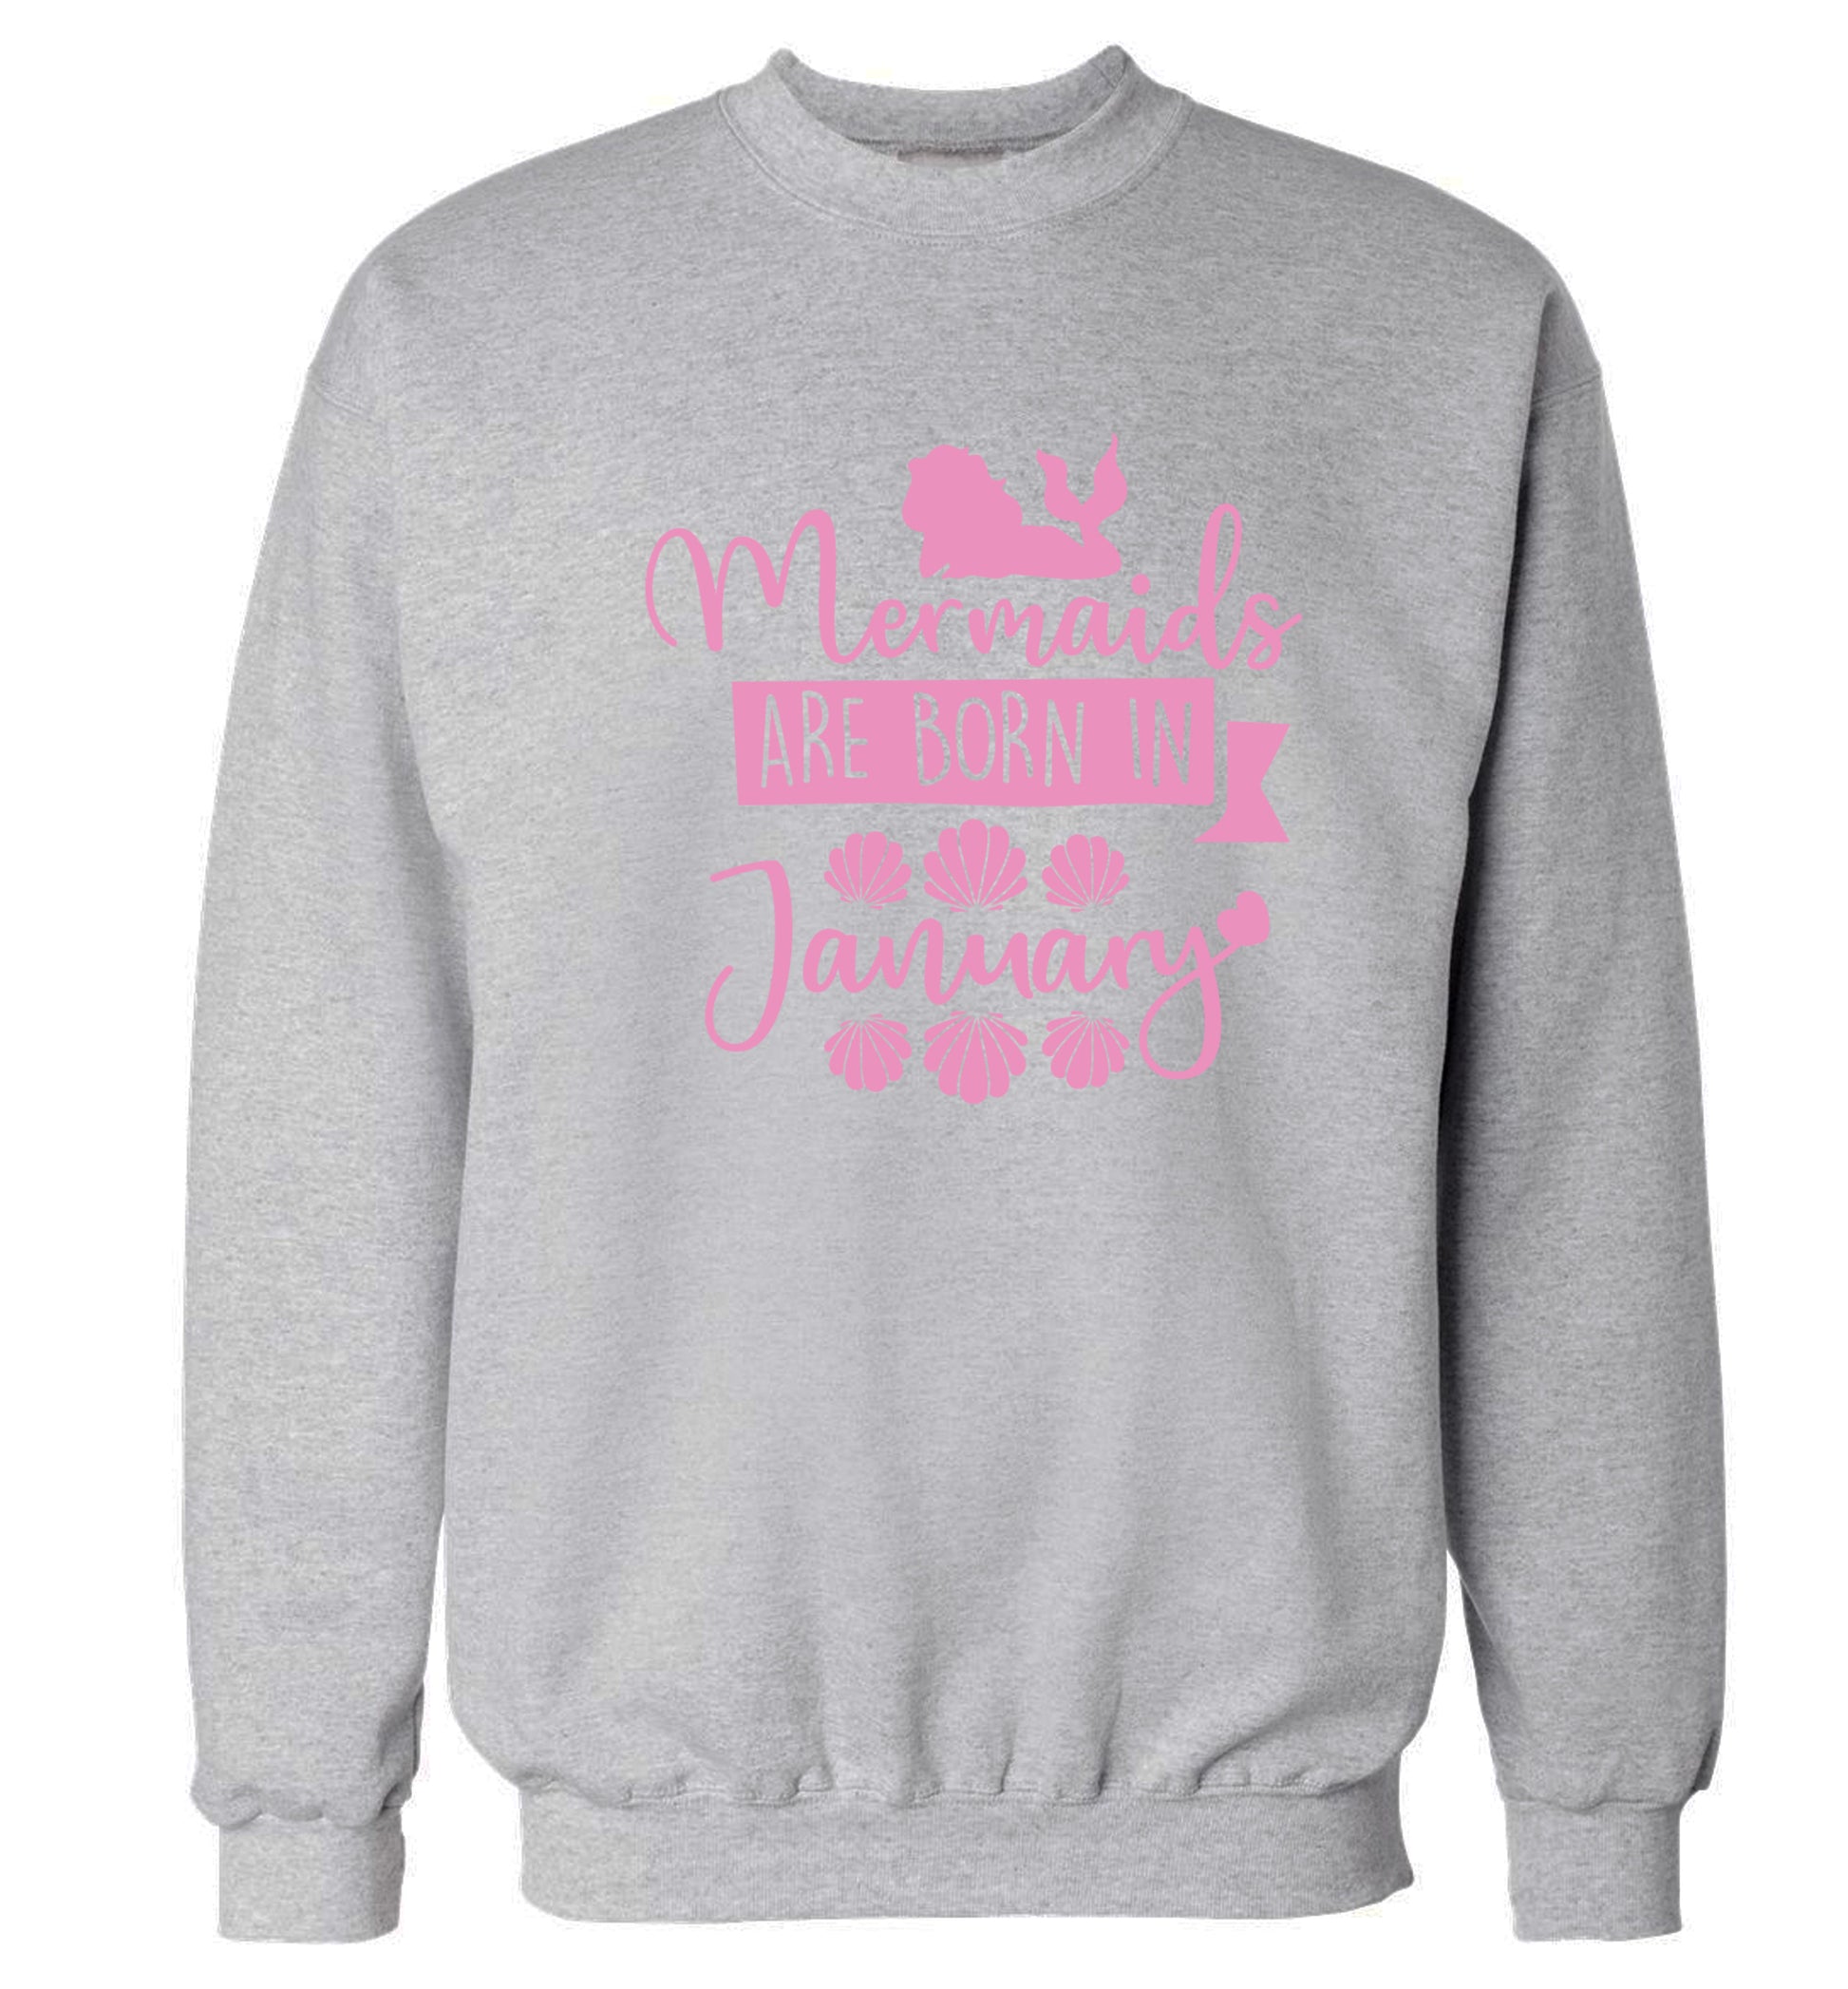 Mermaids are born in January Adult's unisex grey Sweater 2XL